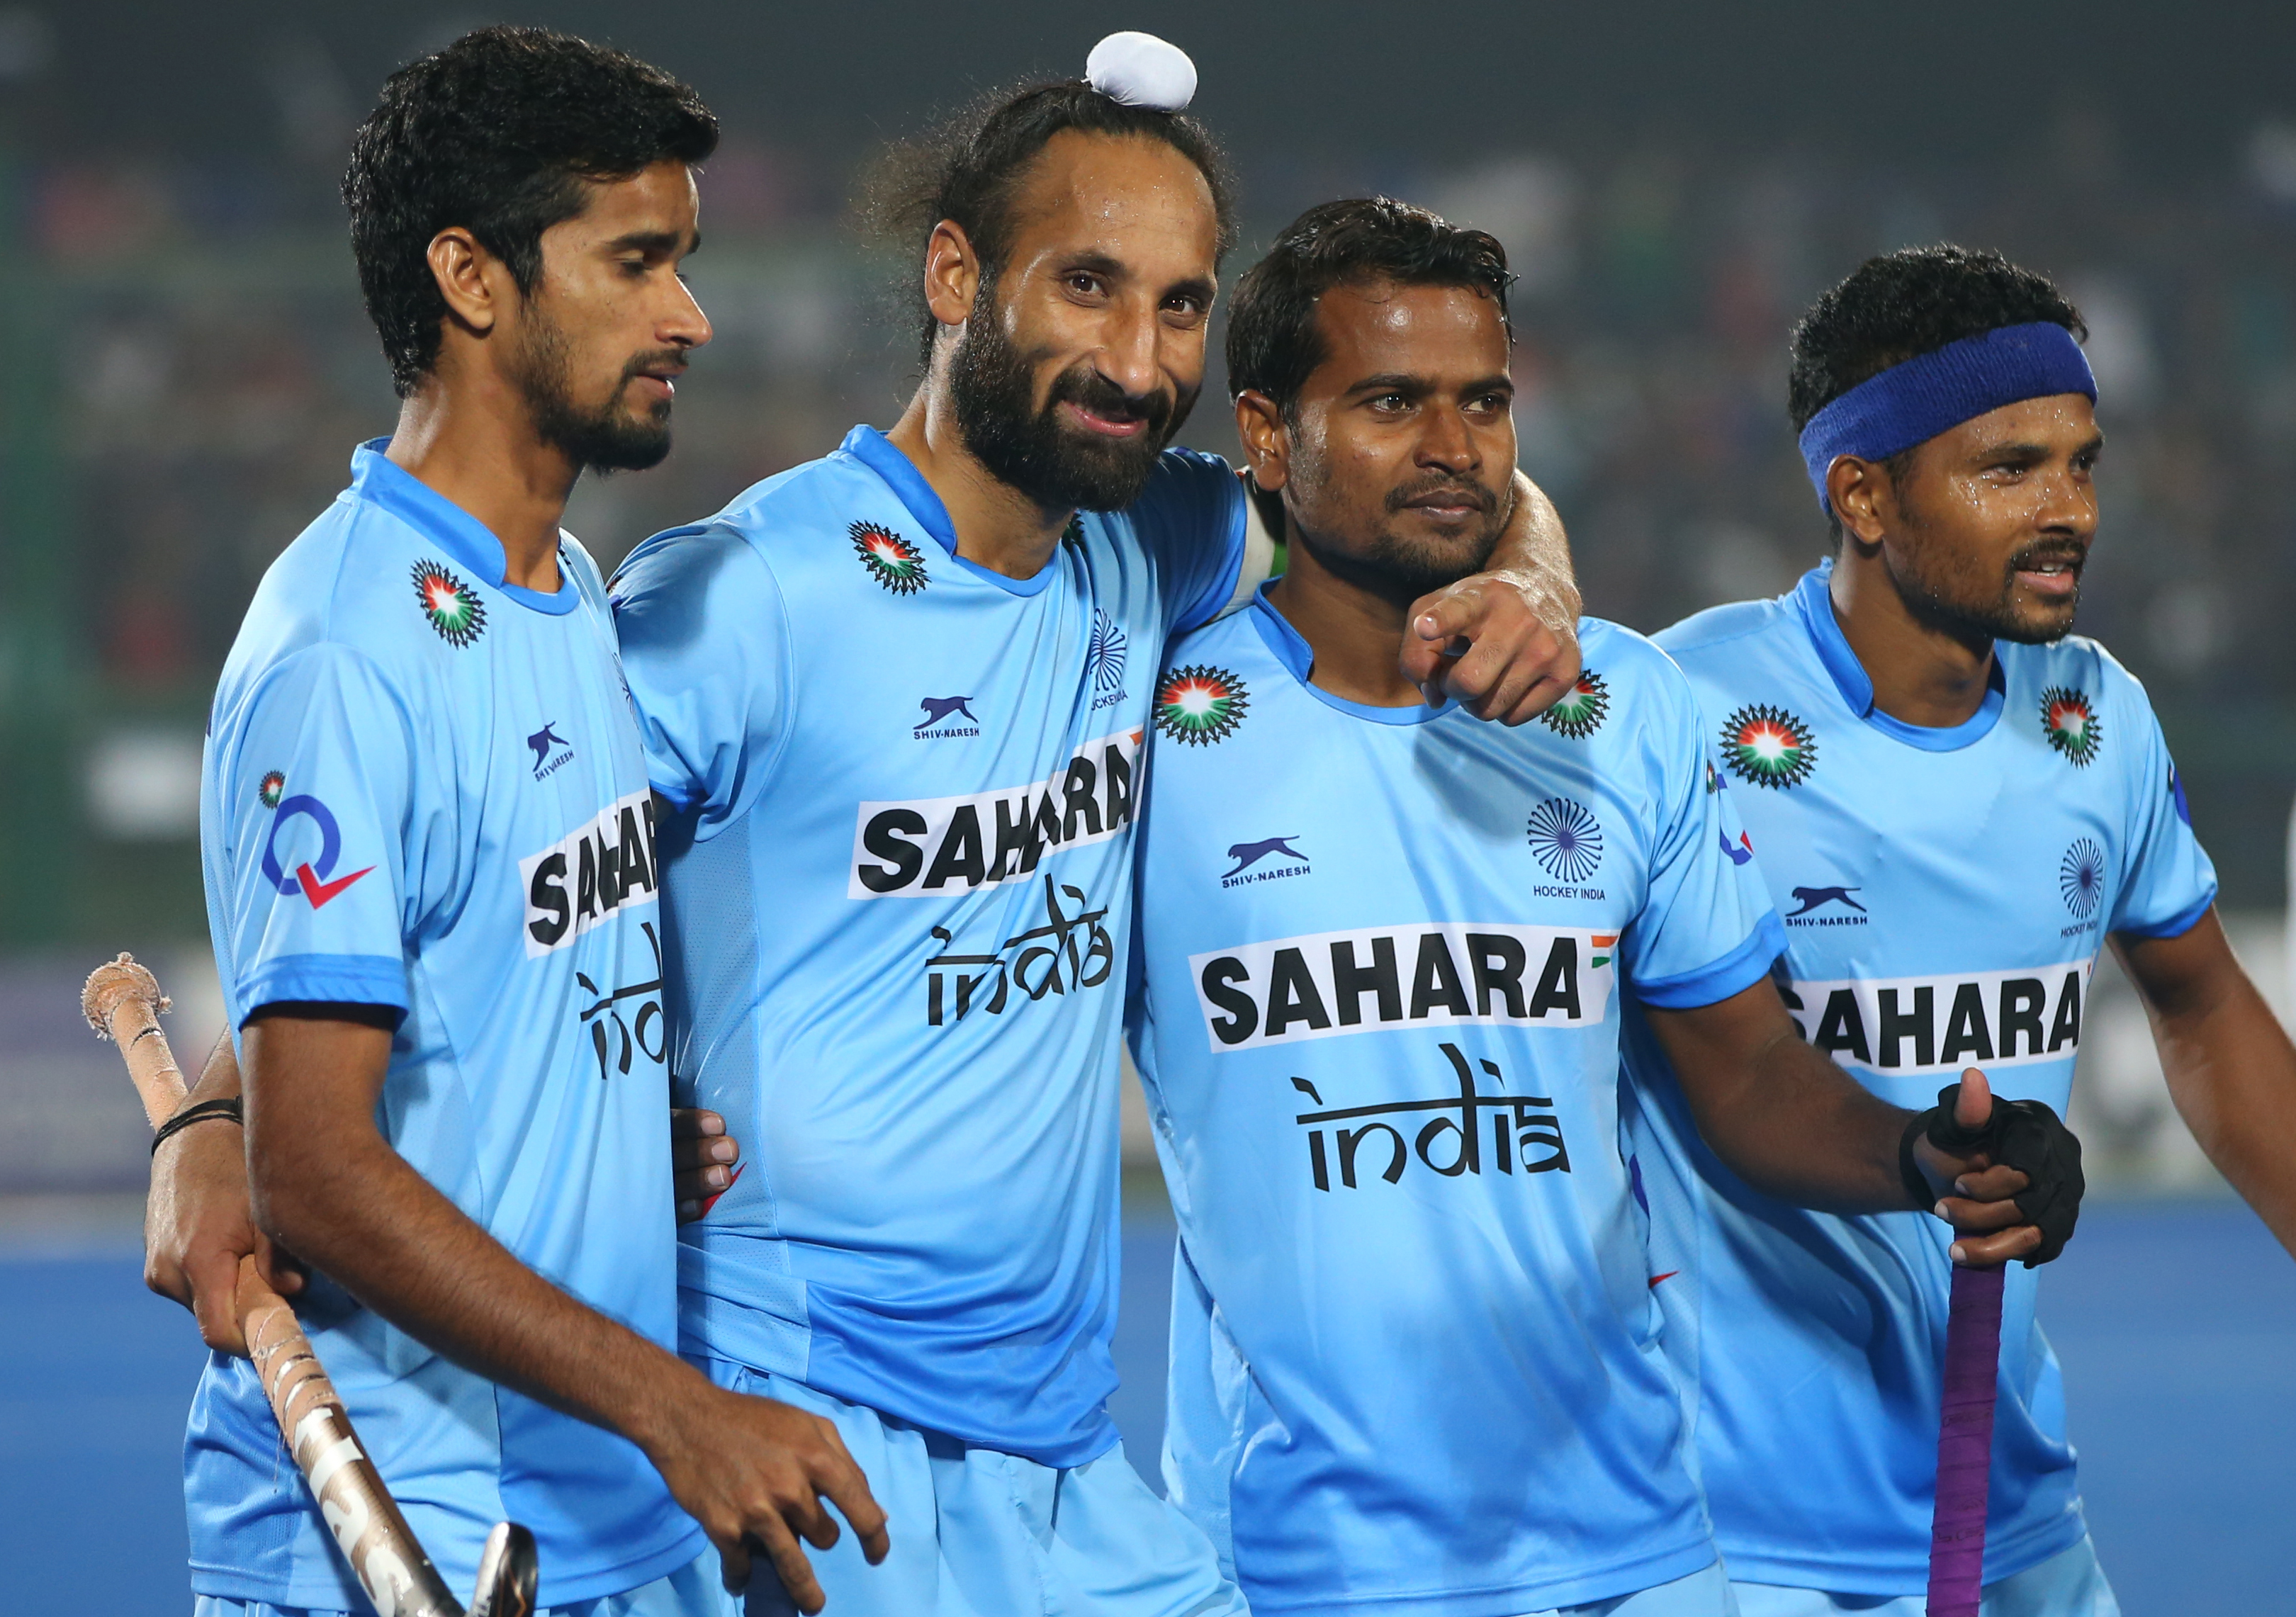 Hockey India announces squad for 6 Nations Invitational tournament; Sardar Singh and Rupinder Pal return